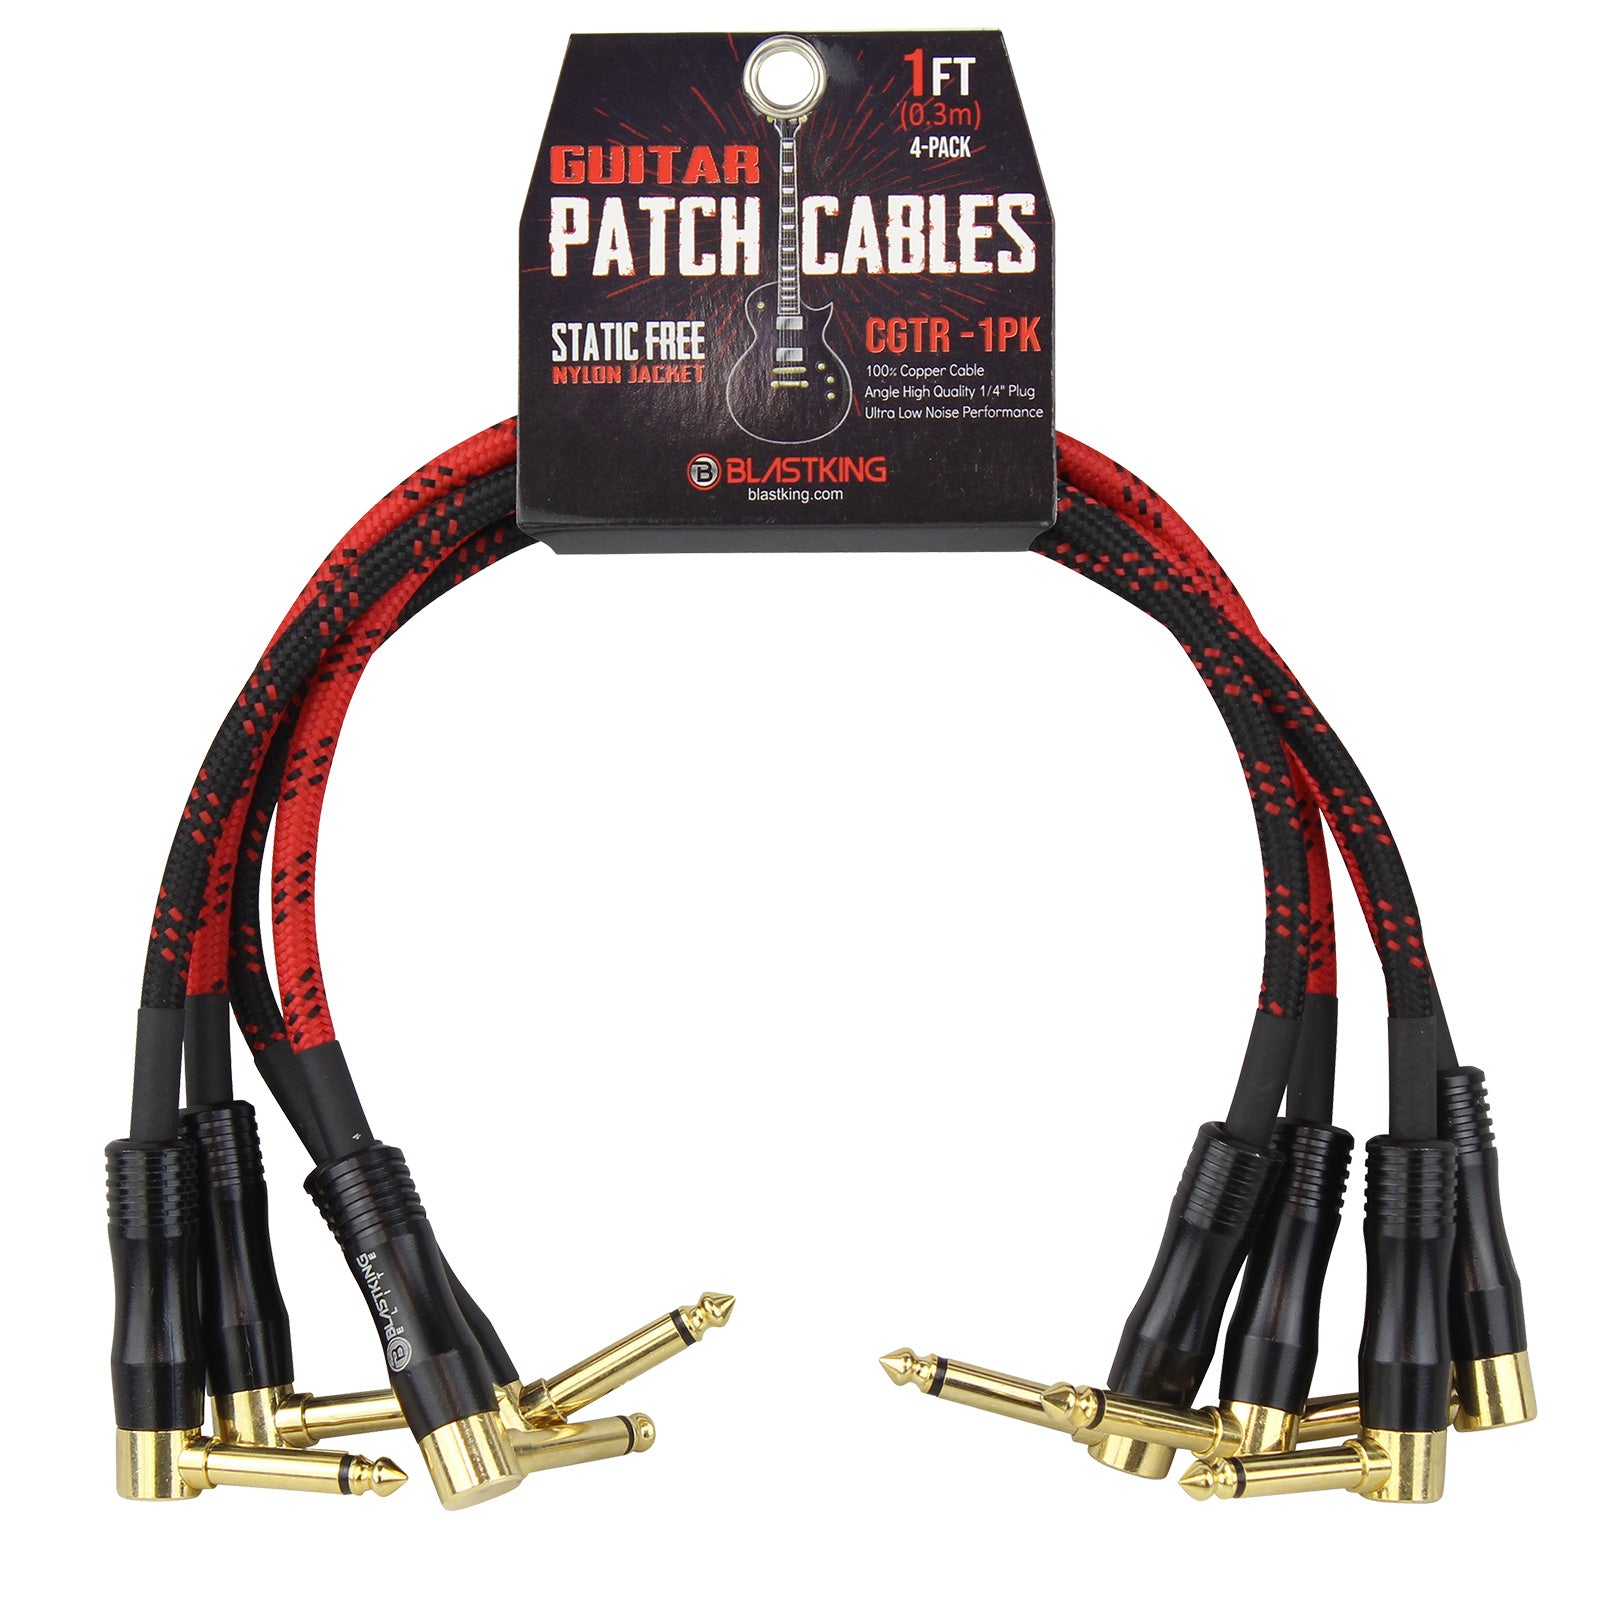 Blastking CGTR-1PK Guitar Patch Cables 4-Pack